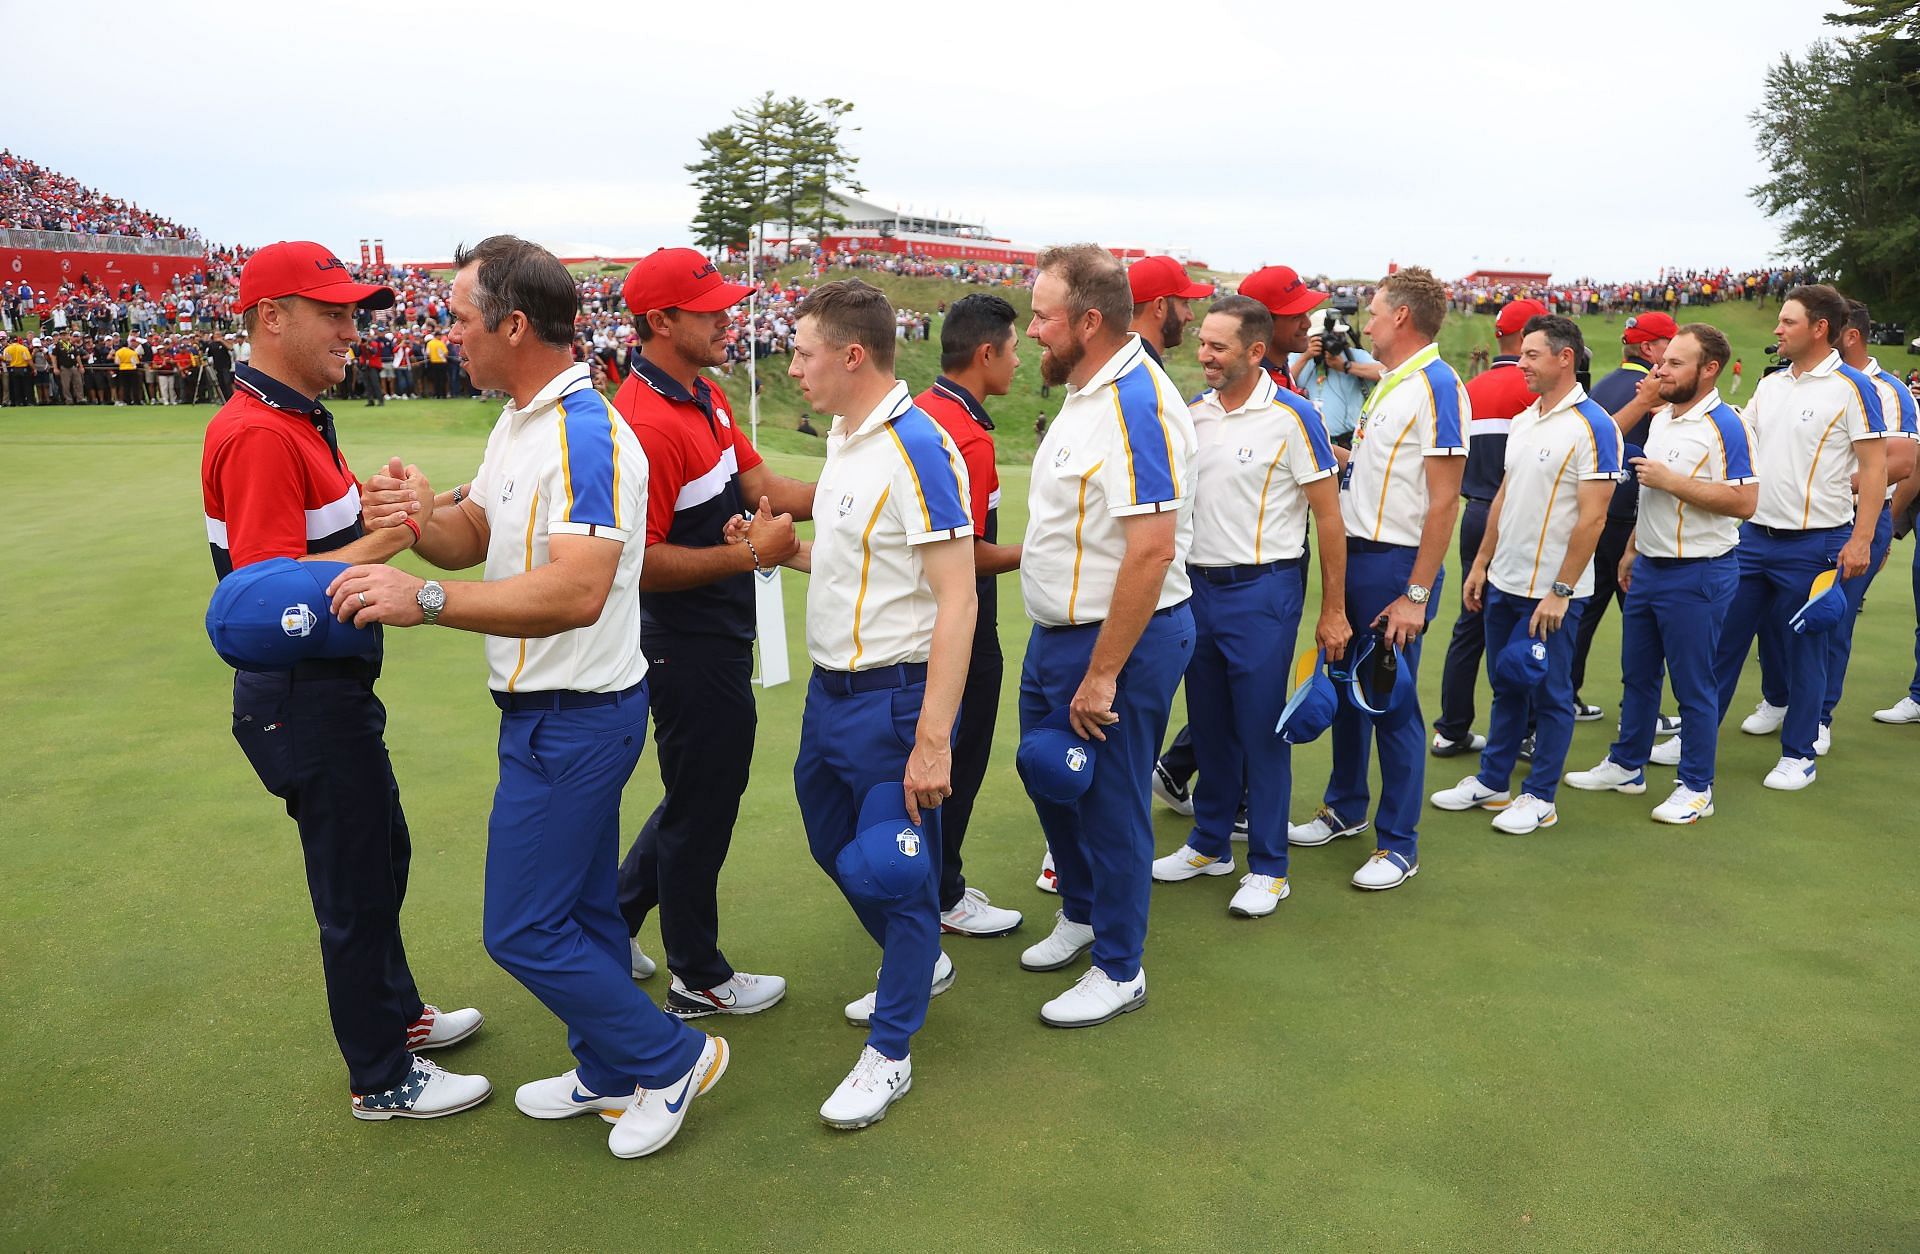 43rd Ryder Cup. Several golfers who were there at 2021, are currently involved in LIV. (Image via Getty).